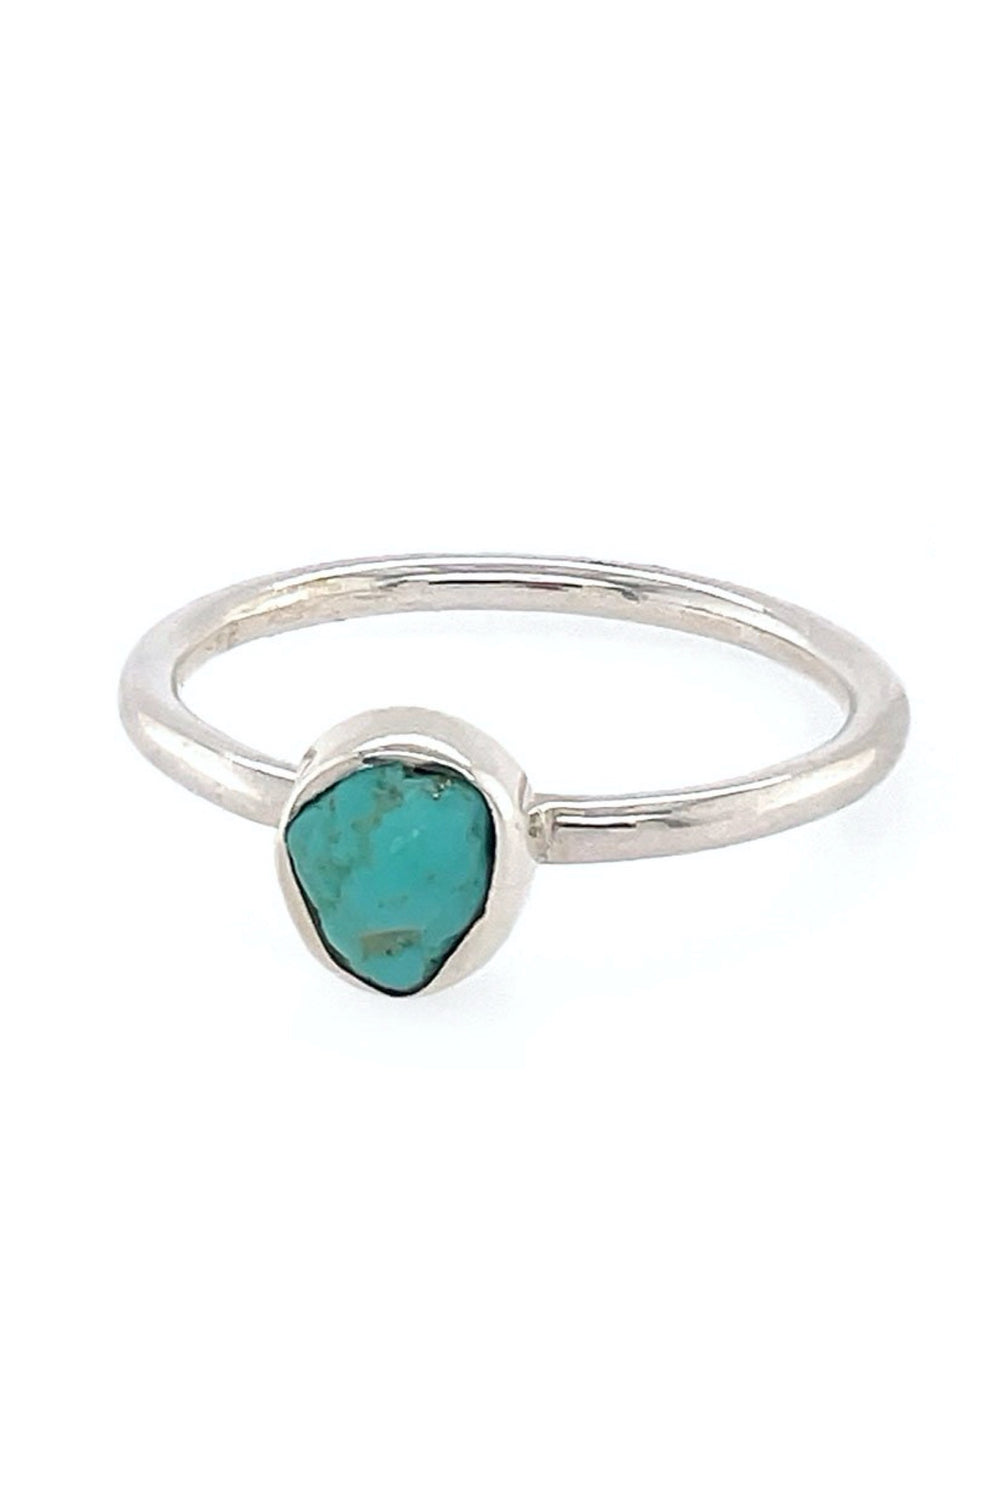 Turquoise Silver Spellbound Ring